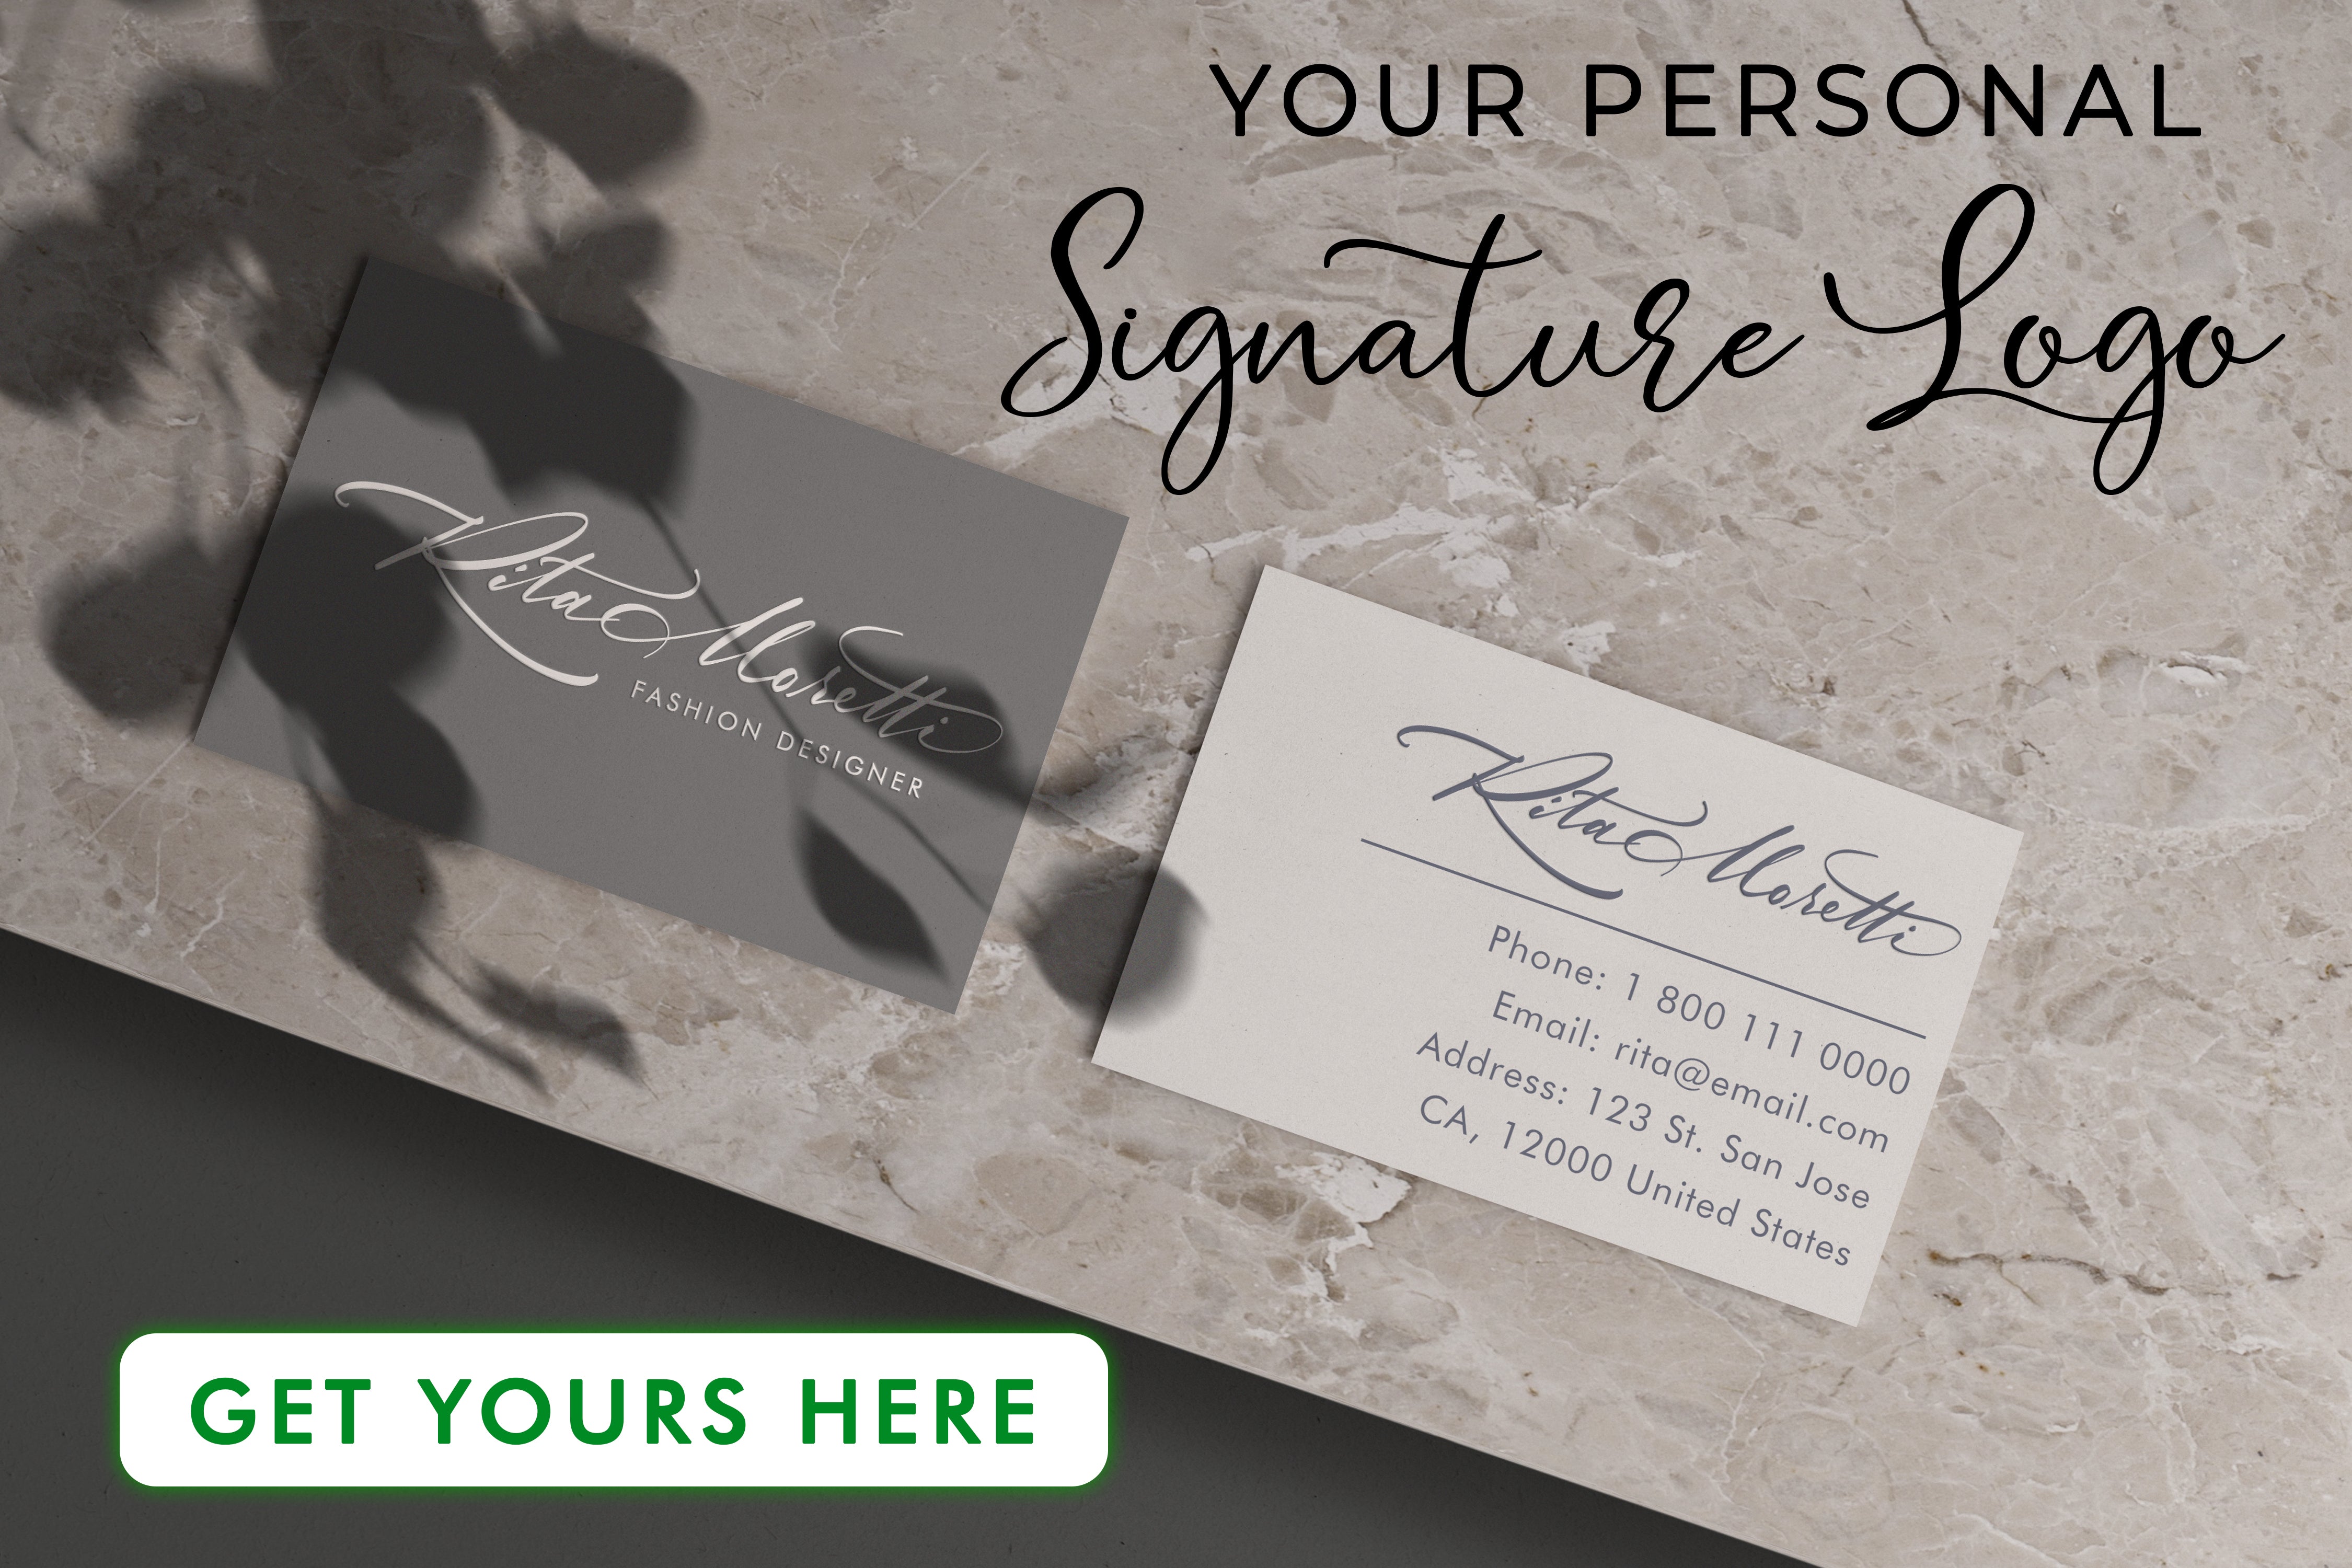 Discover the impact of business card fonts on brand perception. Learn how to choose the right typeface for business cards and professional use.